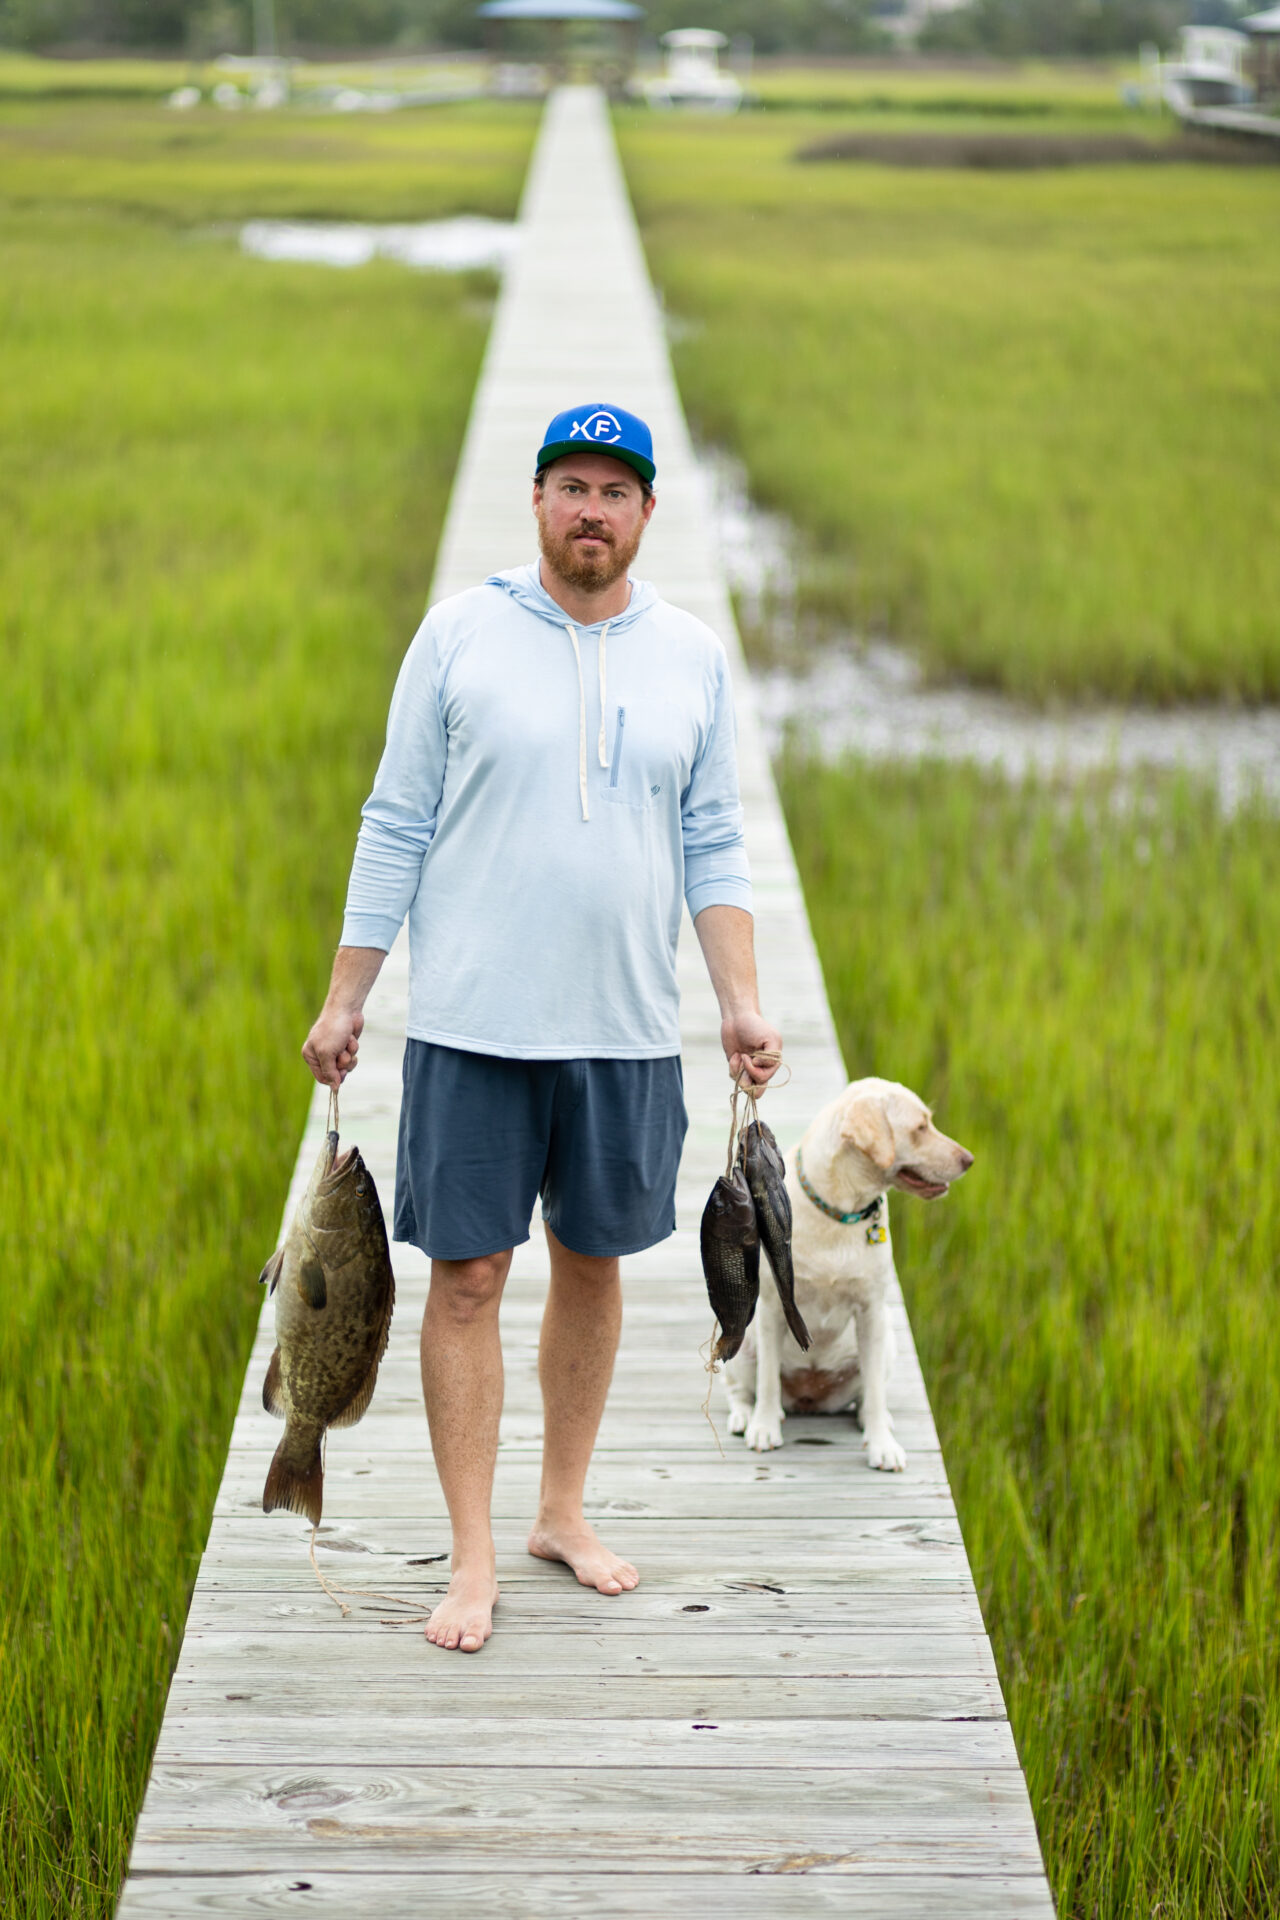 James London of Chubby Fish carrying fresh-caught fish with his dog beside him